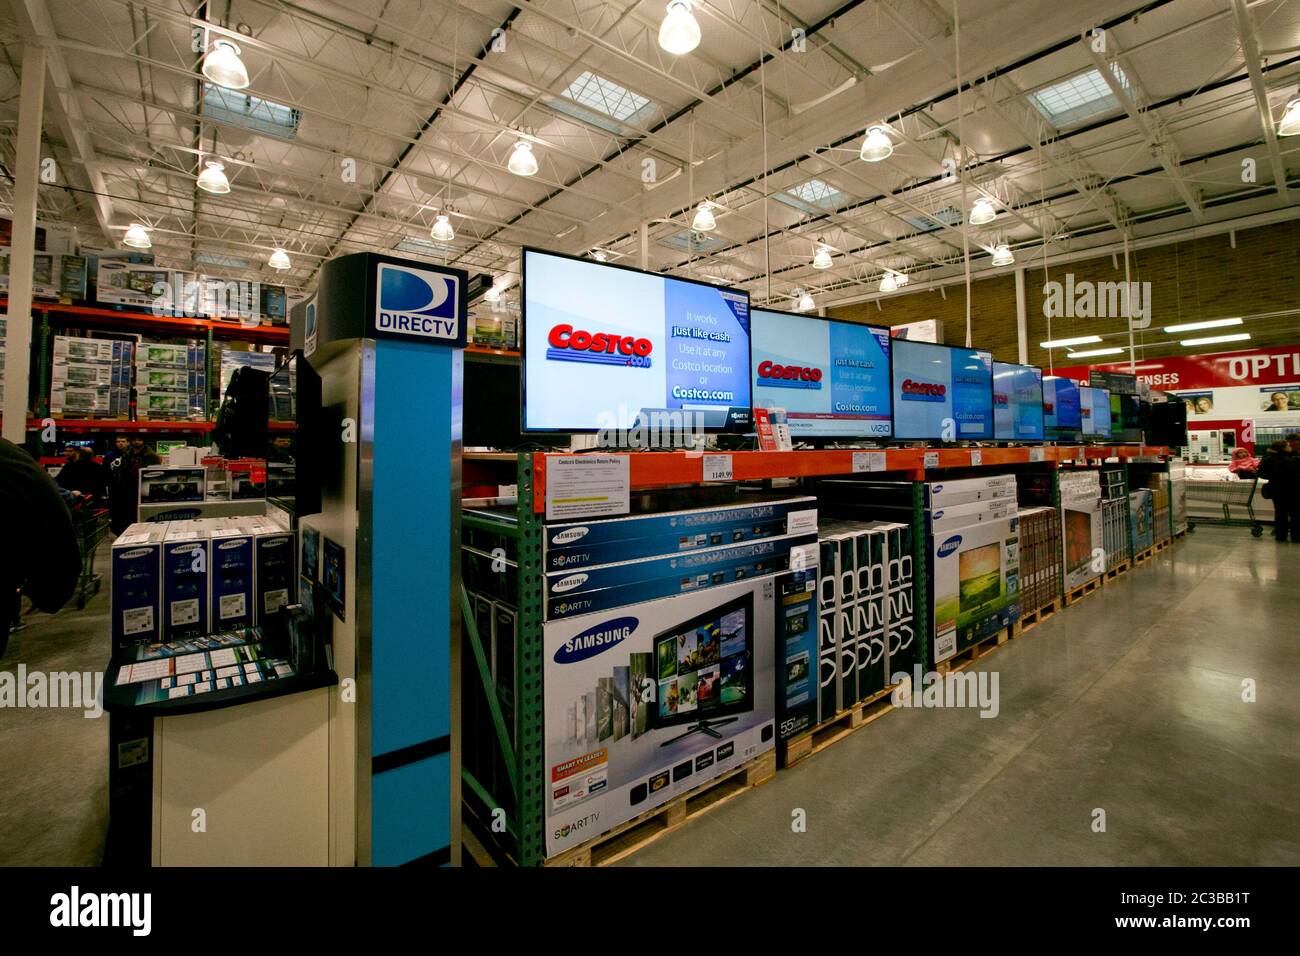 Cedar Park Texas USA, November 22 2013: Flat screen television sets await shoppers at newly opened Costco warehouse club in a fast-growing Austin suburb.   ©Marjorie Kamys Cotera/Daemmrich Photography Stock Photo